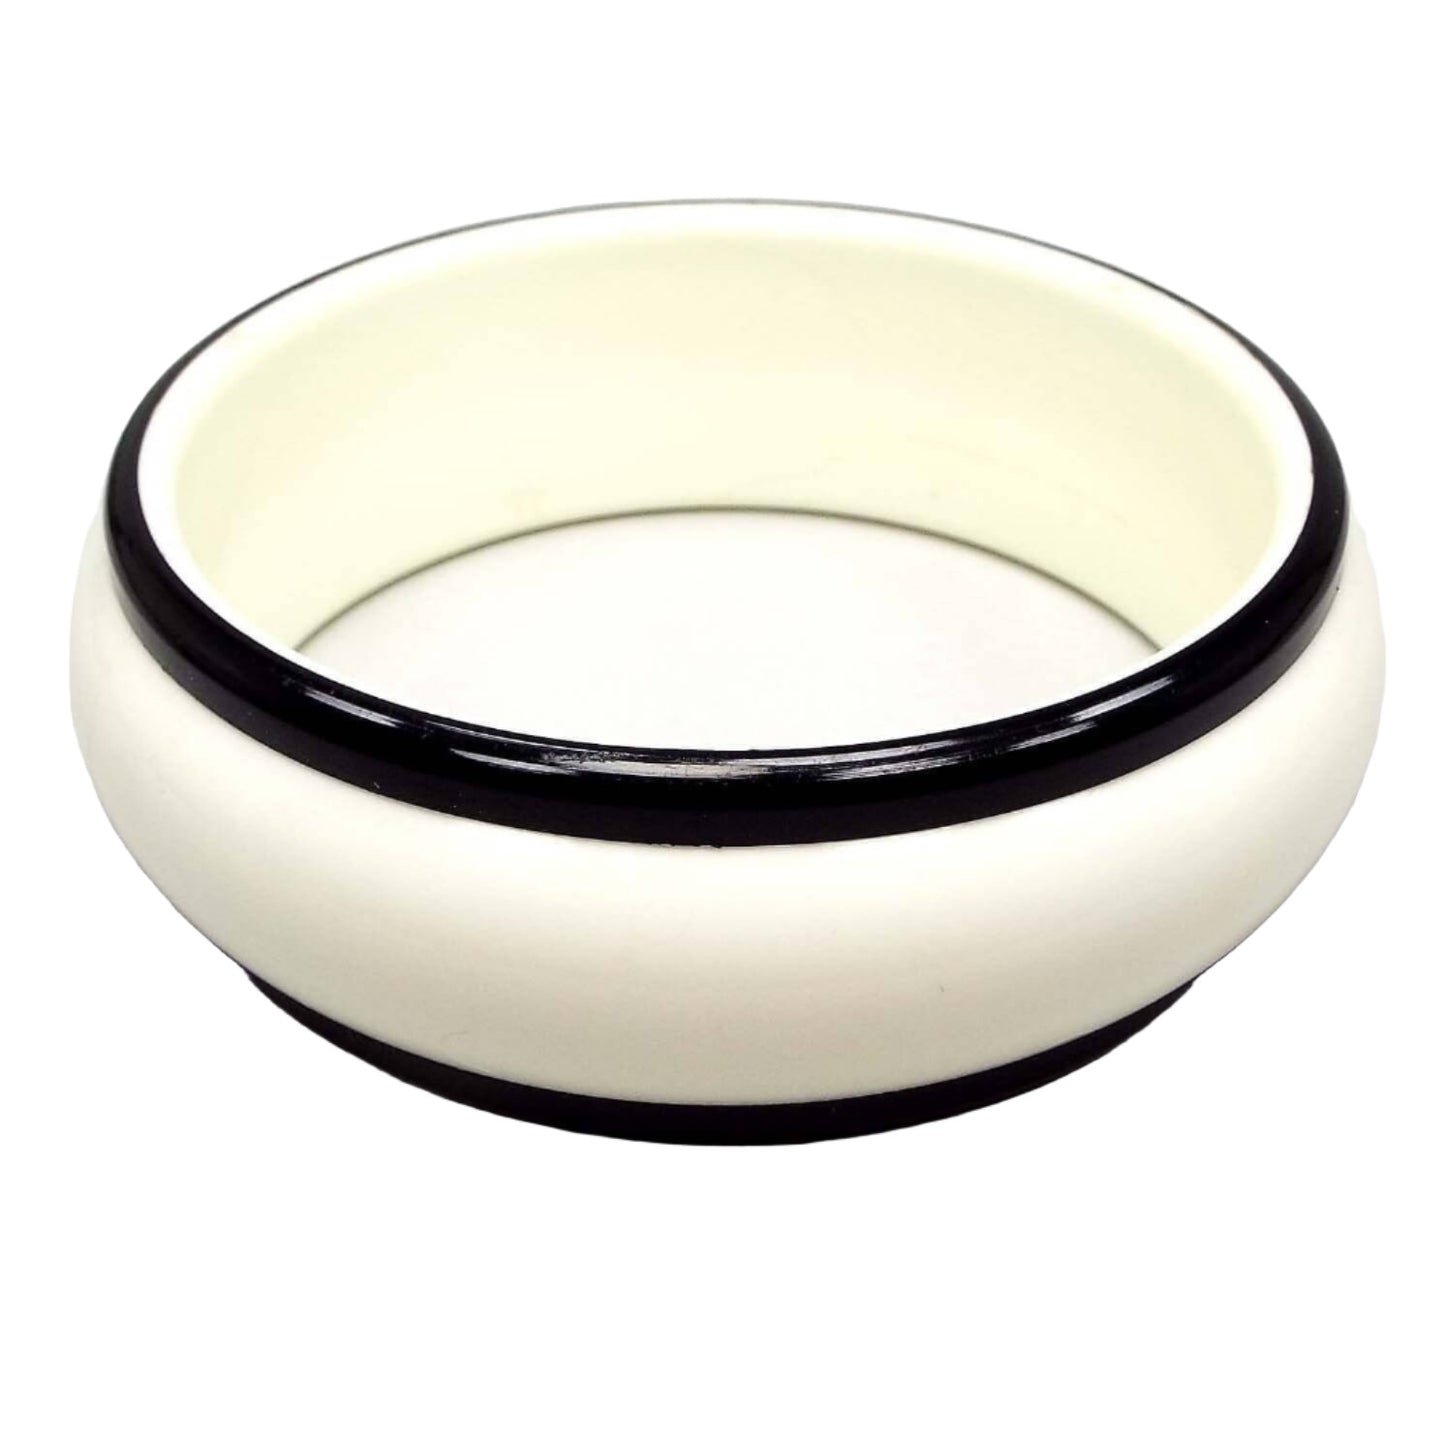 Side view of the Mid Century vintage bangle bracelet. The bangle has a wide design with white plastic and a black plastic trim on each side. It is a round shaped bangle.